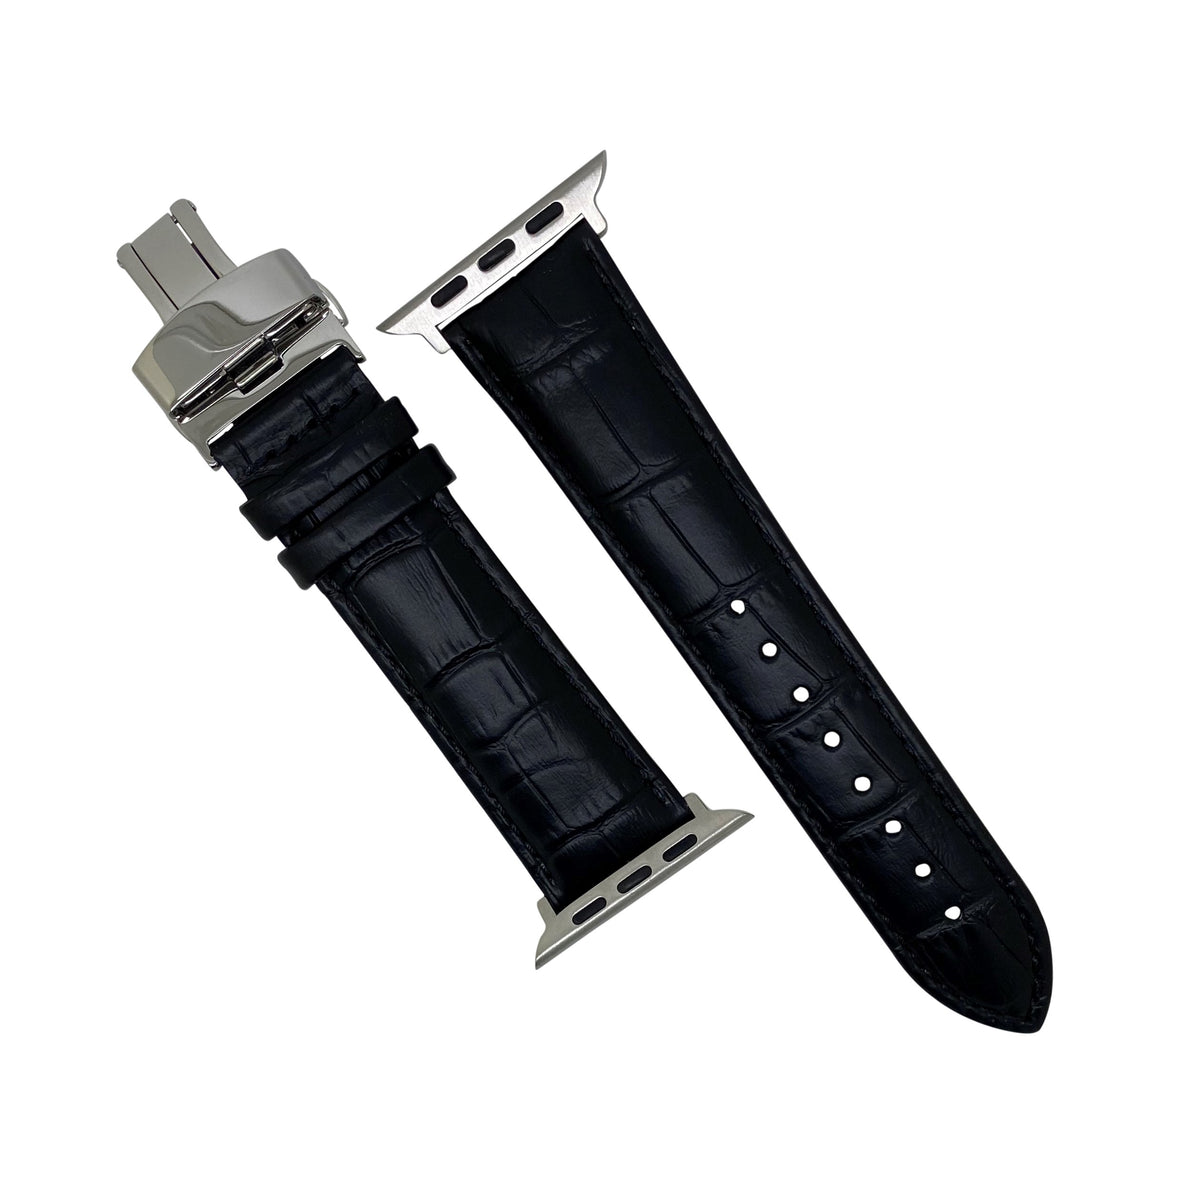 Apple Watch Genuine Croc Pattern Leather Watch Strap in Black w/ Butterfly Clasp (38 & 40mm) - Nomad Watch Works Malaysia